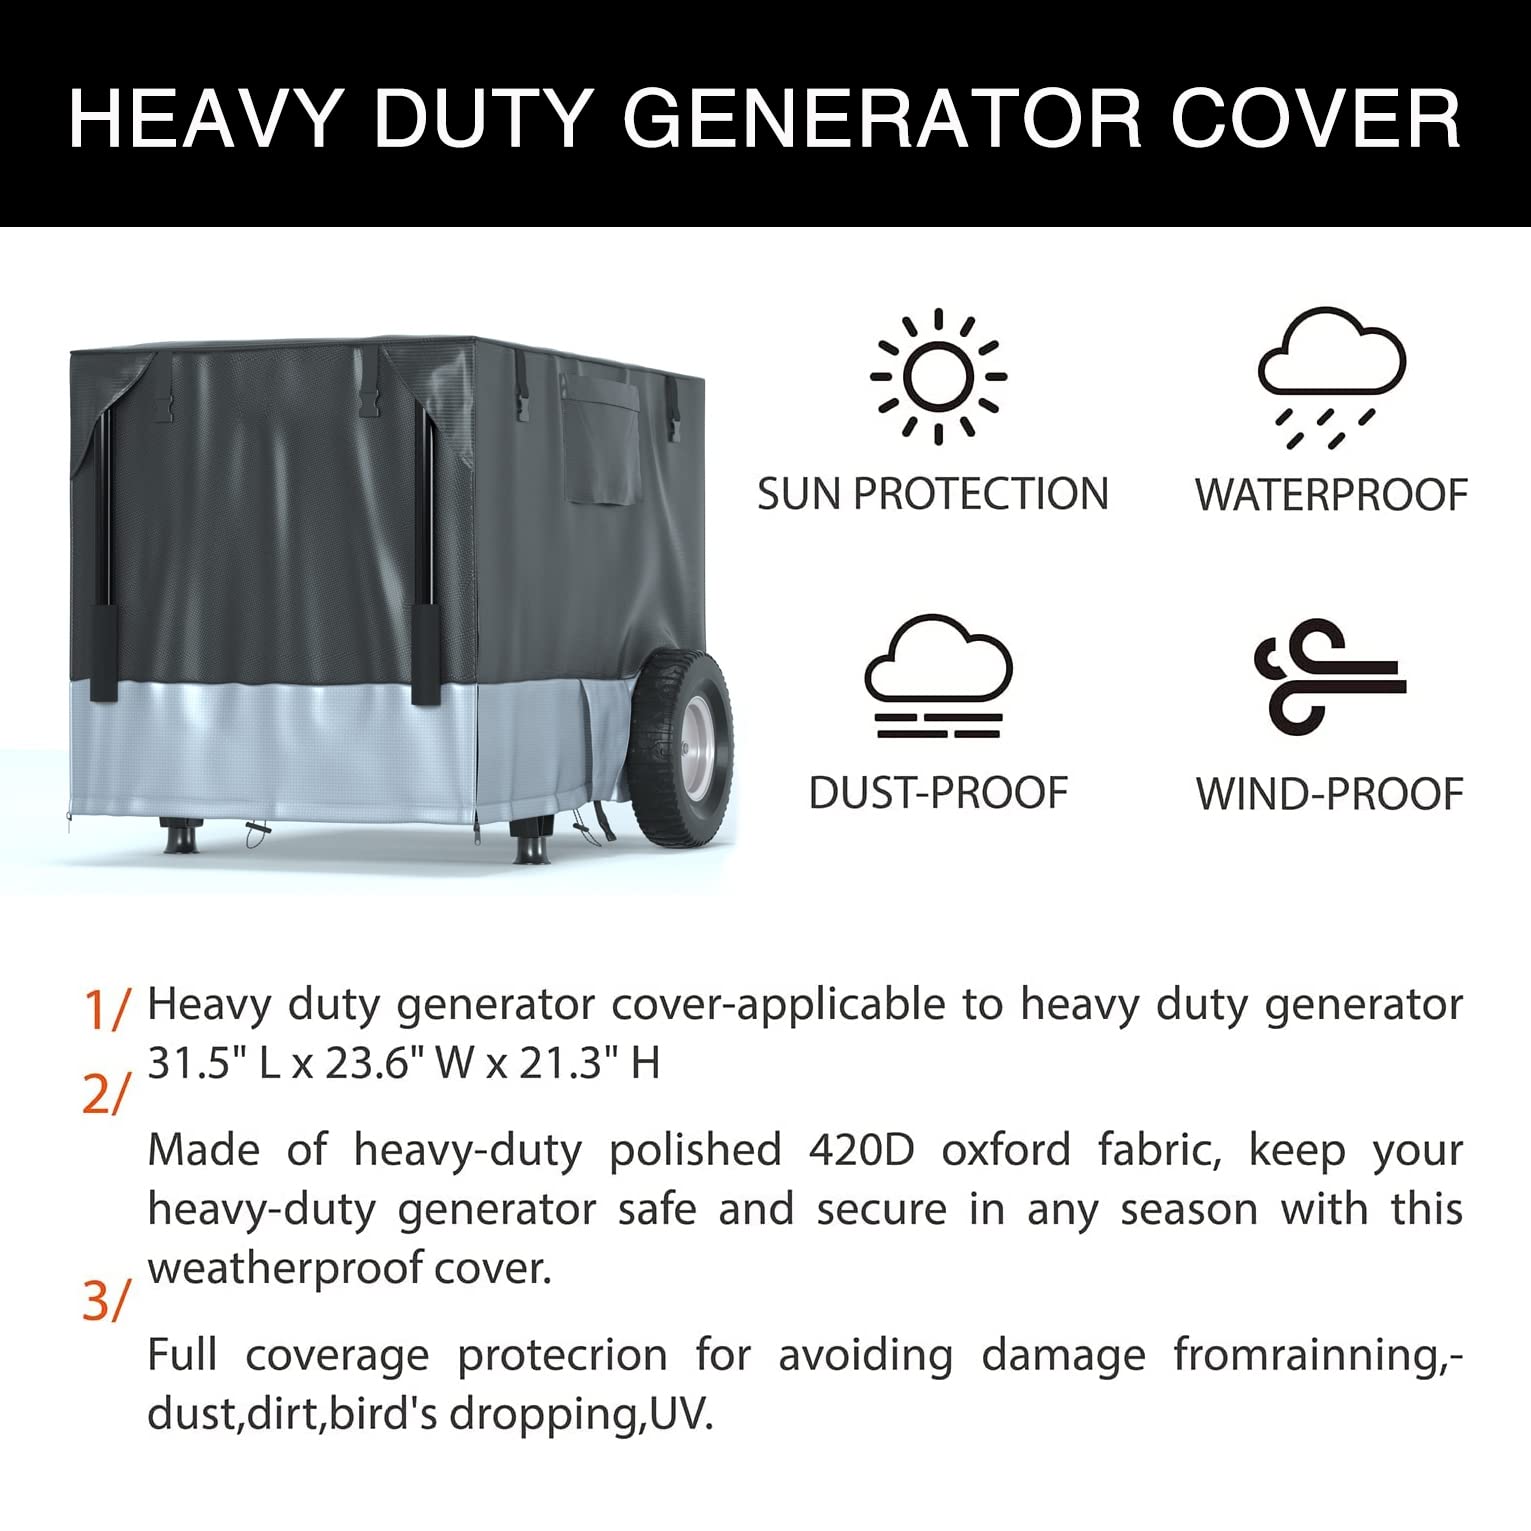 GeHeng Generator Running Cover, Can Be Used While Running, Compatible with Generac XT8500EFI Generac 7678 Generac GP3600 and more generators of similar size.